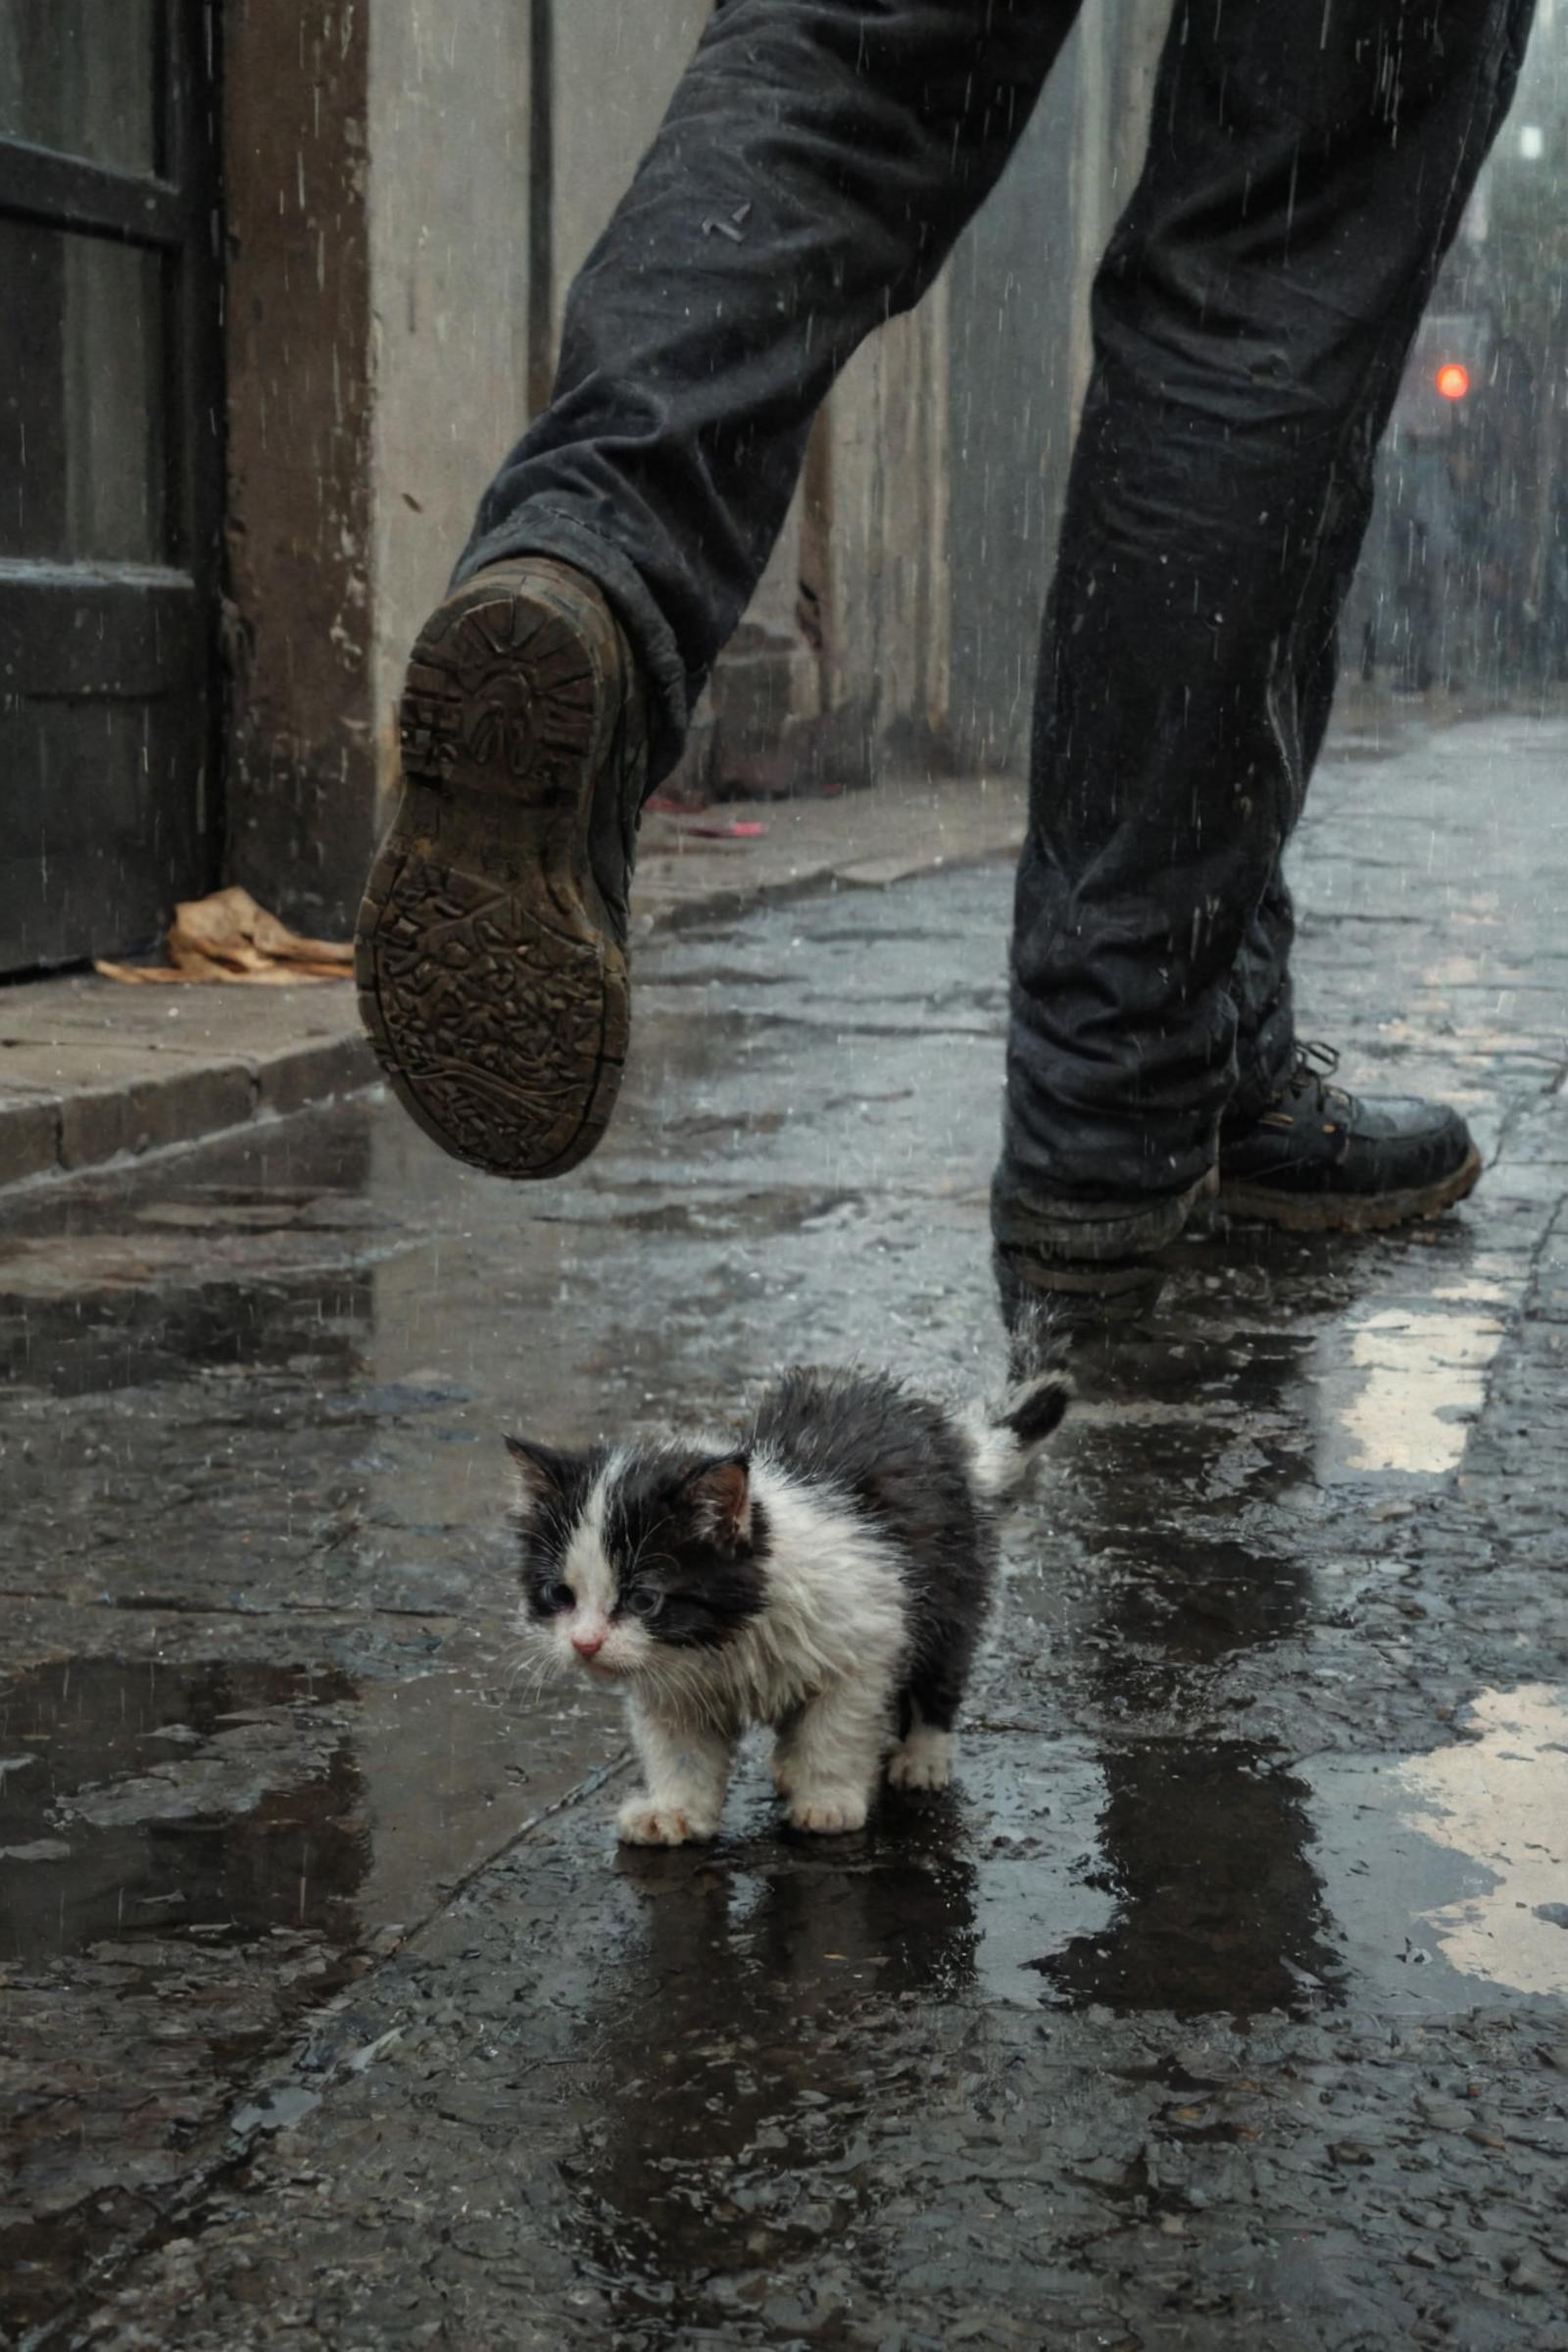 A person wearing black boots is standing over a small black and white kitten, who is looking up at them. The kitten is located on the ground, possibly in the rain, as it appears to be wet. The person is also holding a book in their hand.